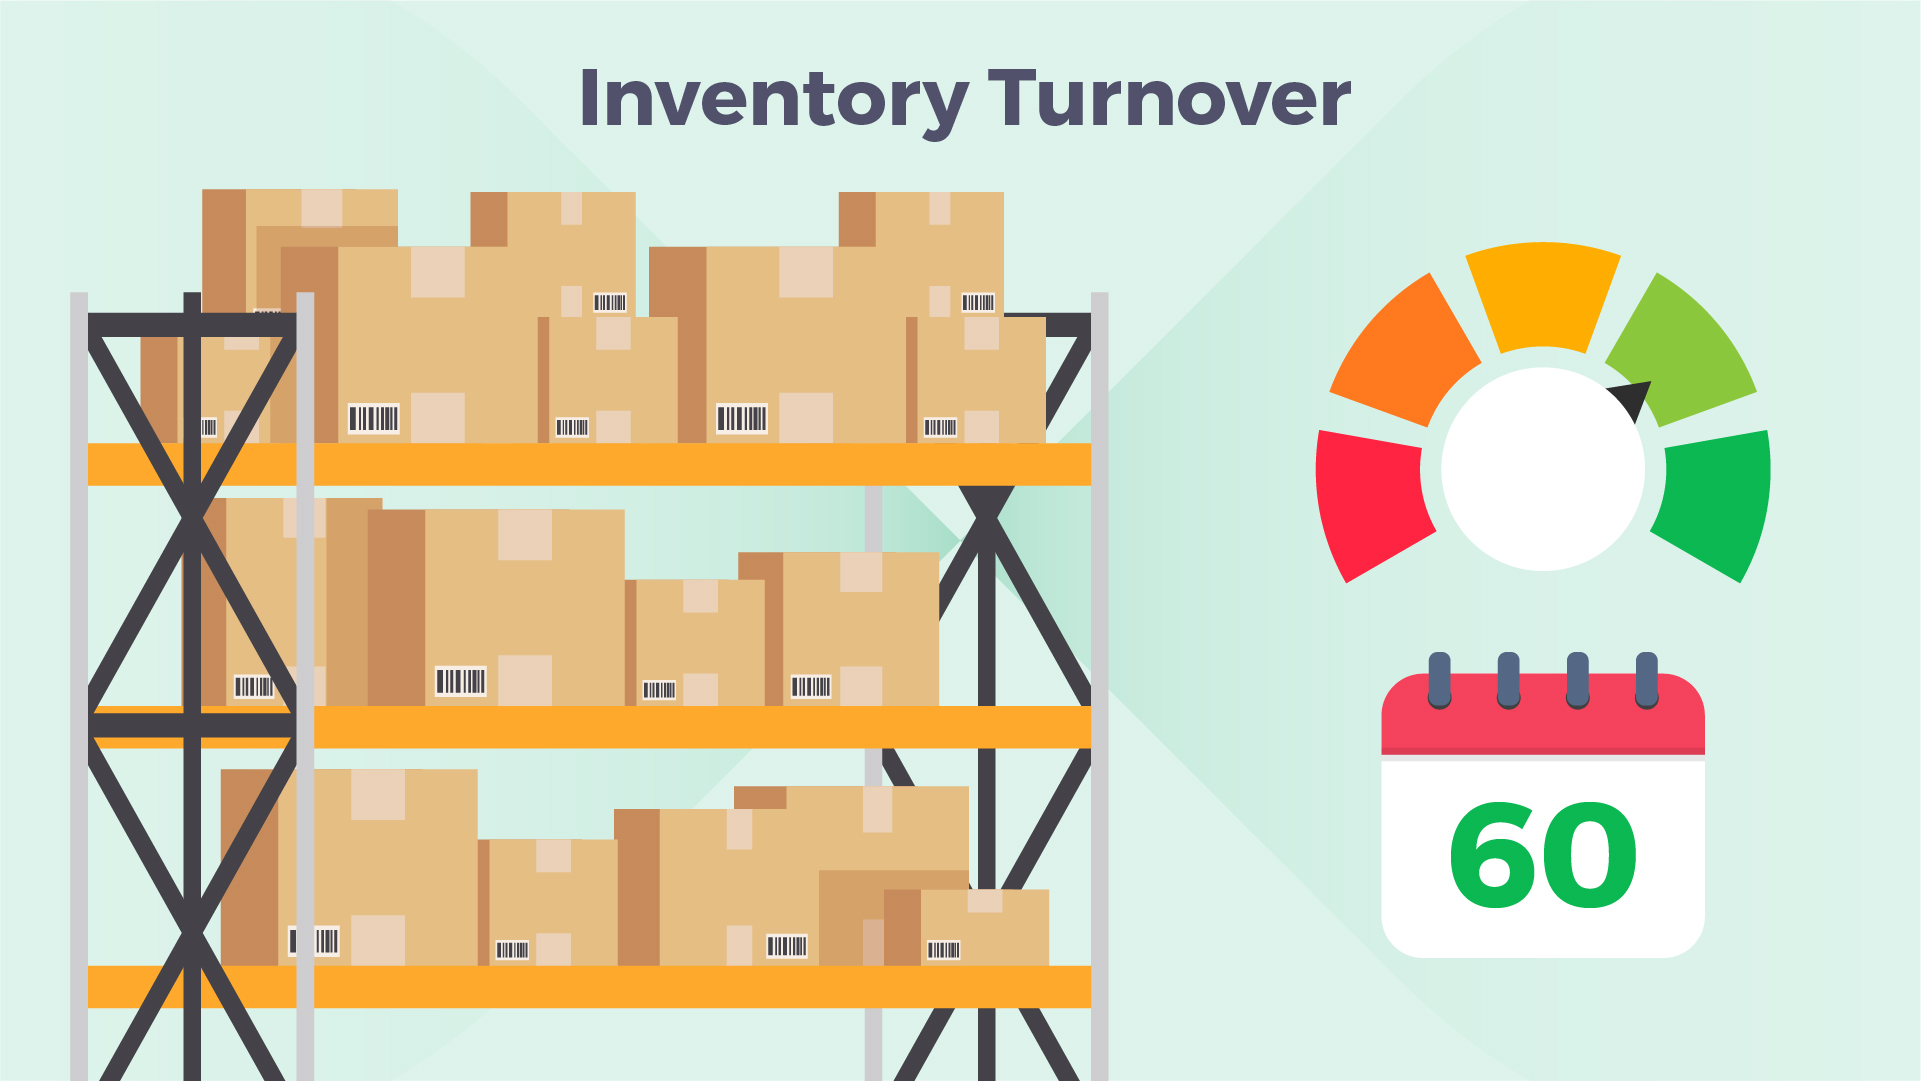 What are the steps to improve your inventory turnover ratio?